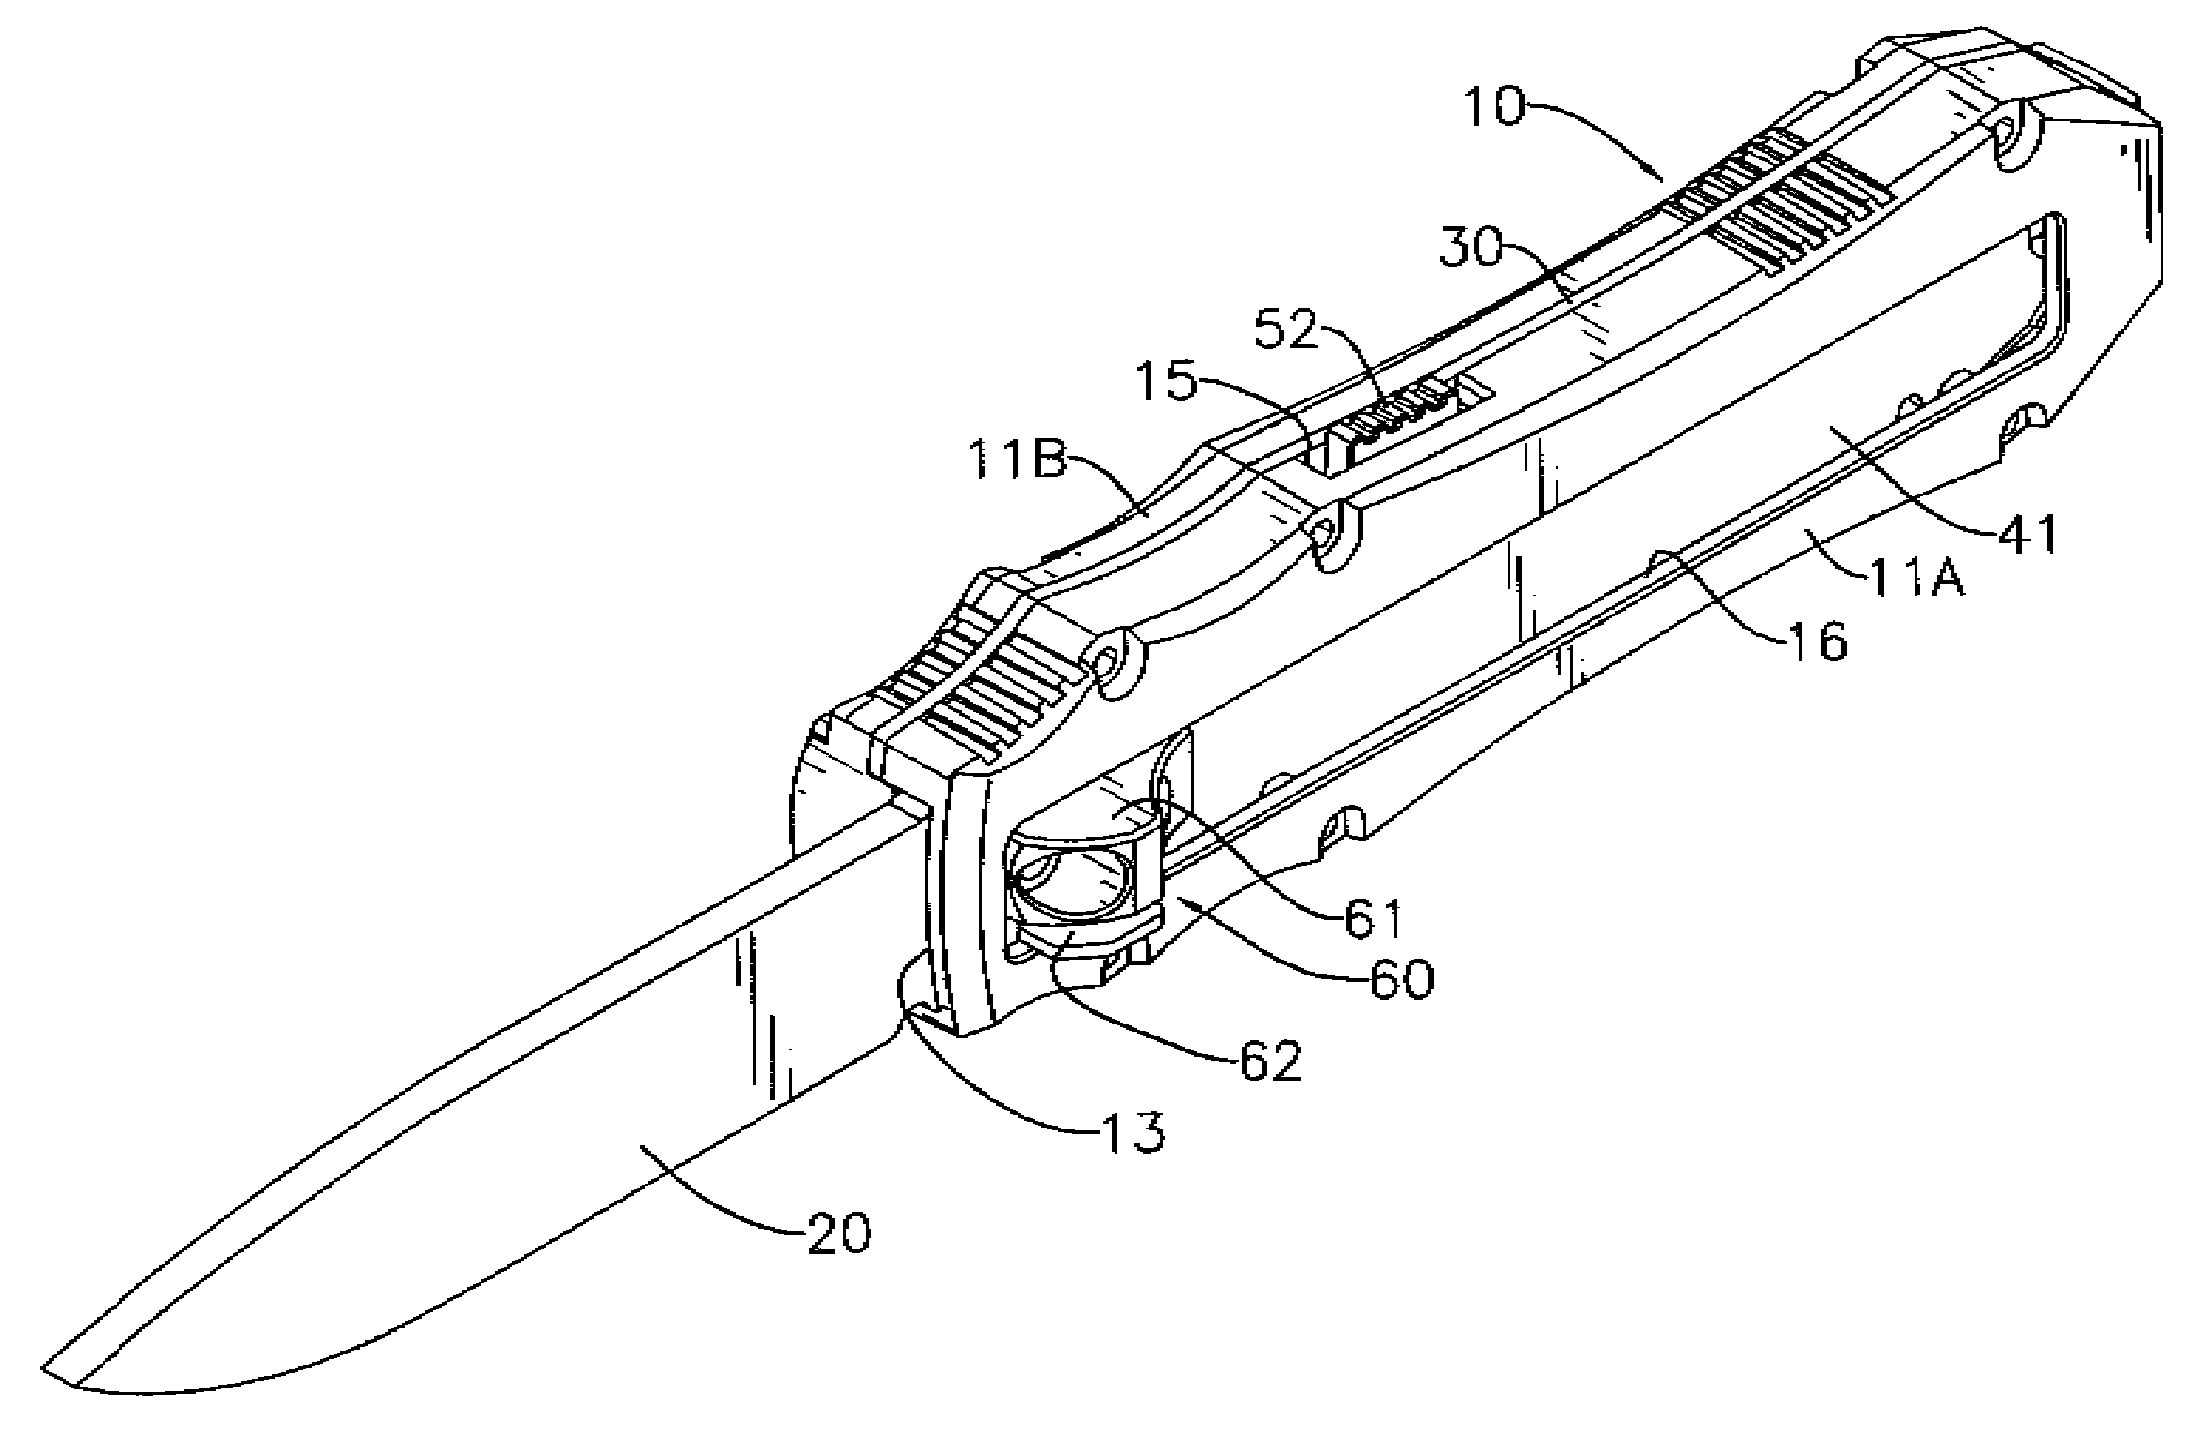 Retractable blade knife with opening assisted mechanism